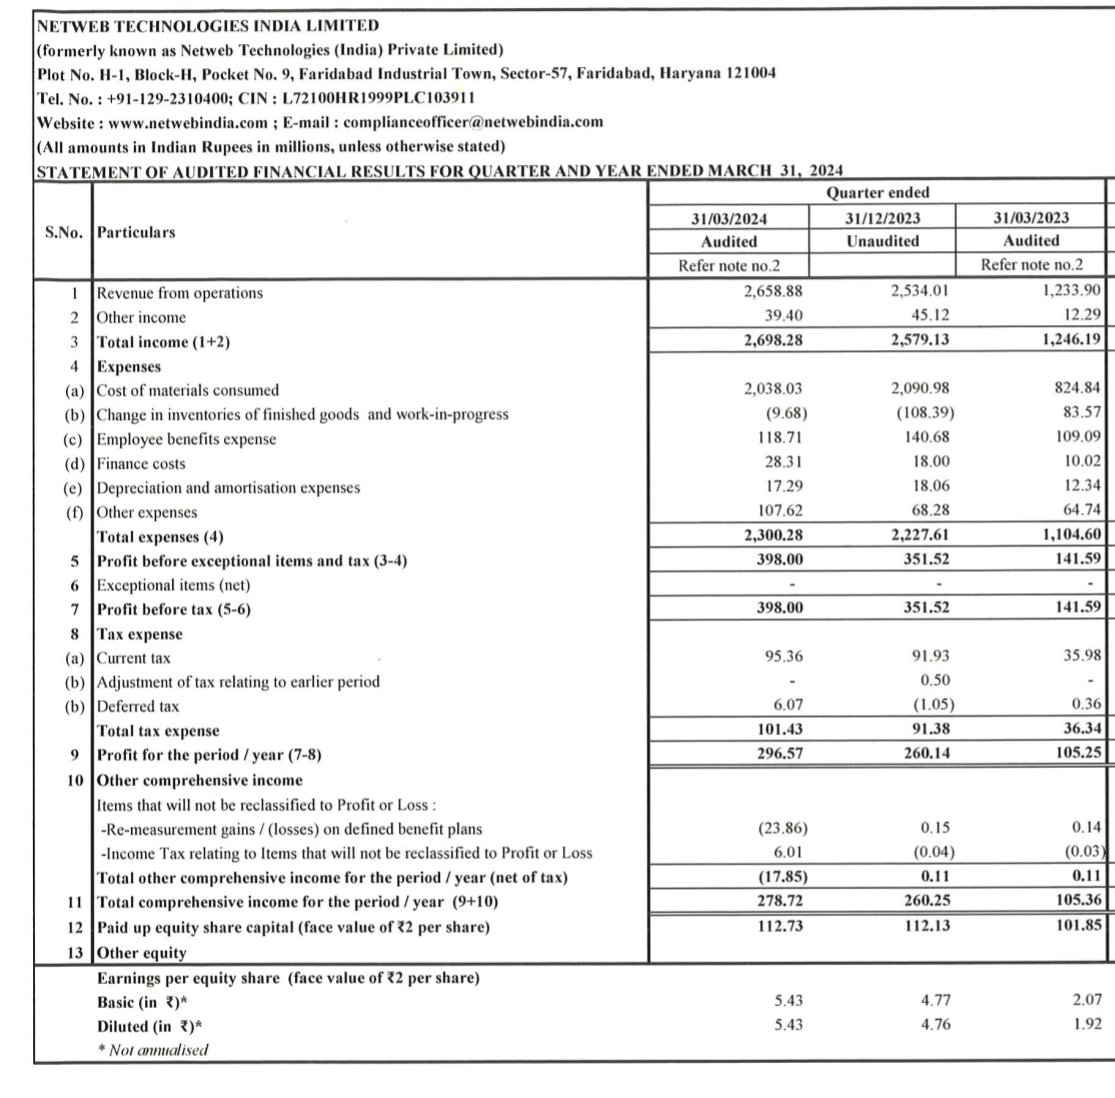 Netweb Technologies 
#NETWEB

Solid #Q4FY23🔥 

Highest ever revenue, EBITDA, PBT and PAT in comps history 🔥

Delivers a great set

Rev at 265cr vs 123cr
Q3 at 253cr

PBT at 40cr vs 14cr
Q3 at 35cr

PAT at 30cr vs 10cr
Q3 at 26cr

OCF could ve been better 
At 18cr vs 27cr